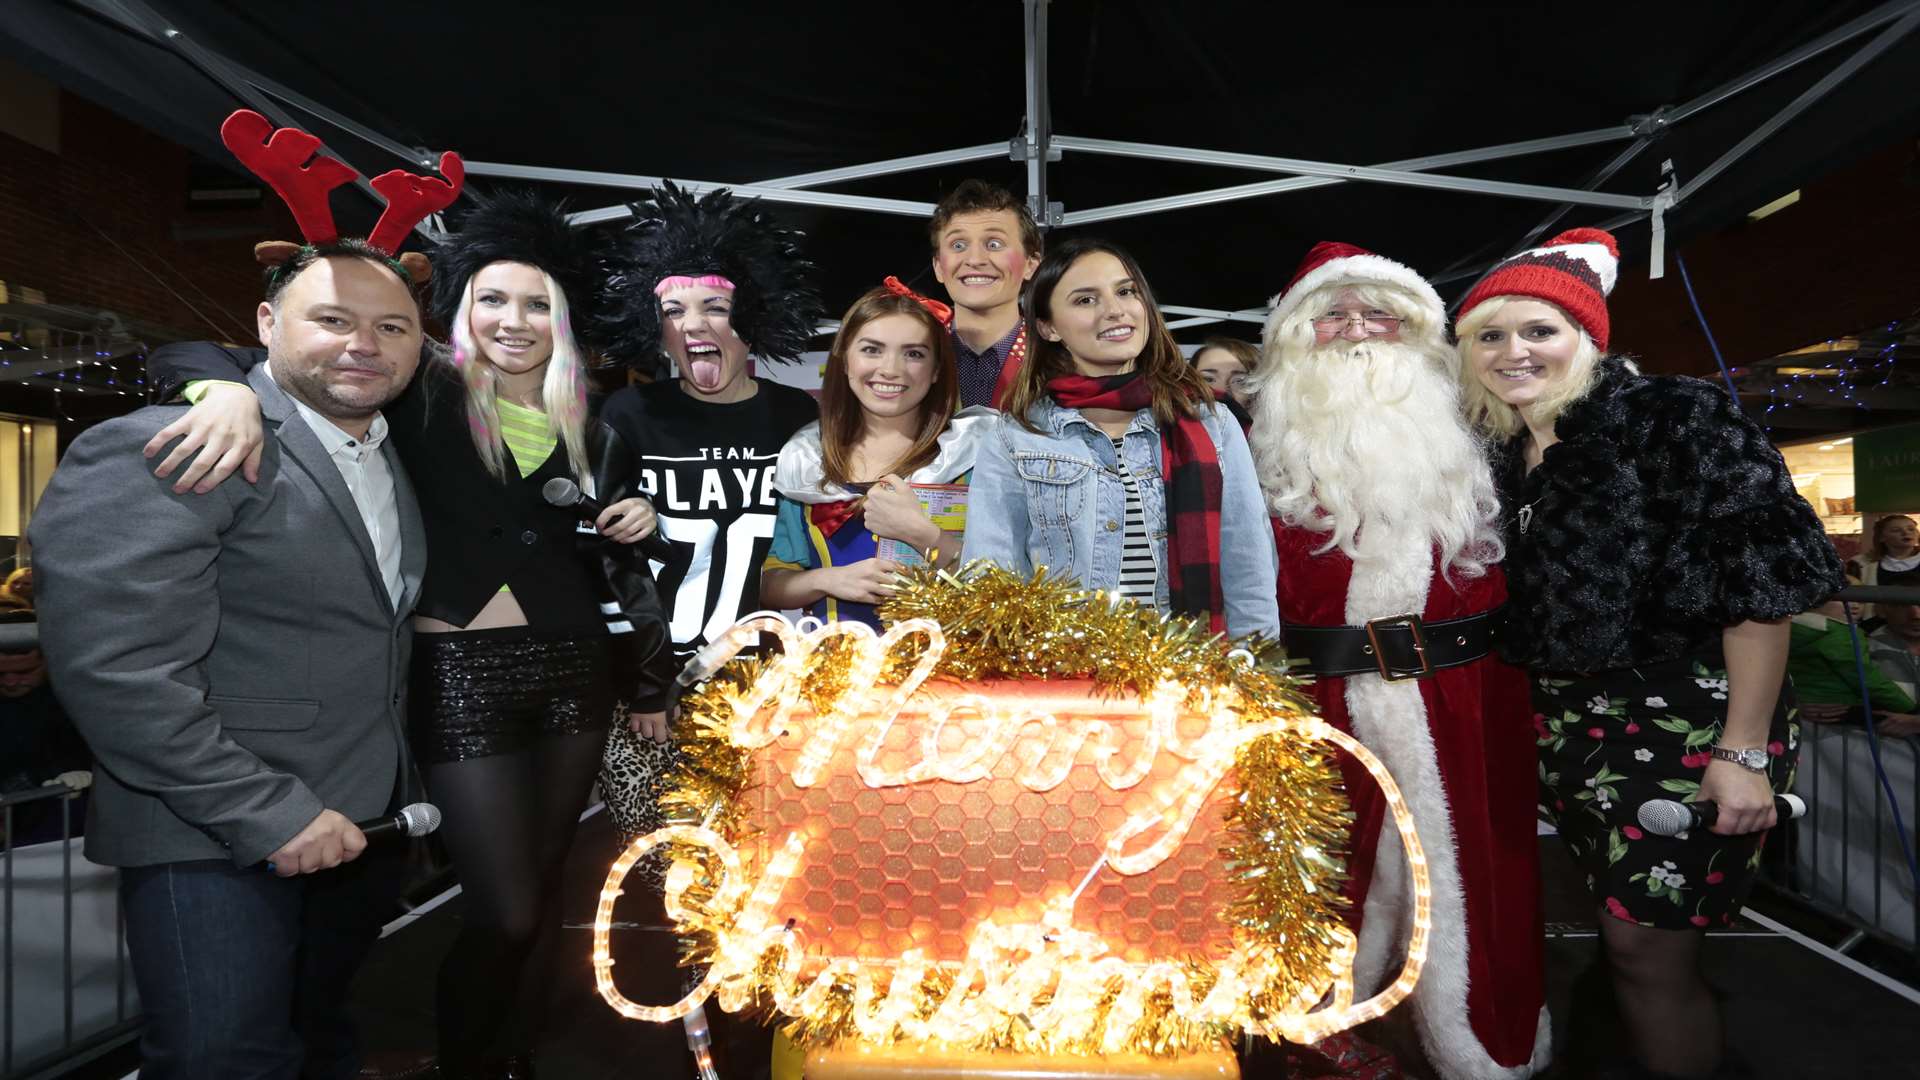 kmfm's Garry Wilson with Blonde Electra, the cast of Snow White, Made in Chelsea star Lucy Watson, Father Christmas and kmfm presenter Emma Adam turn on the all-important lights